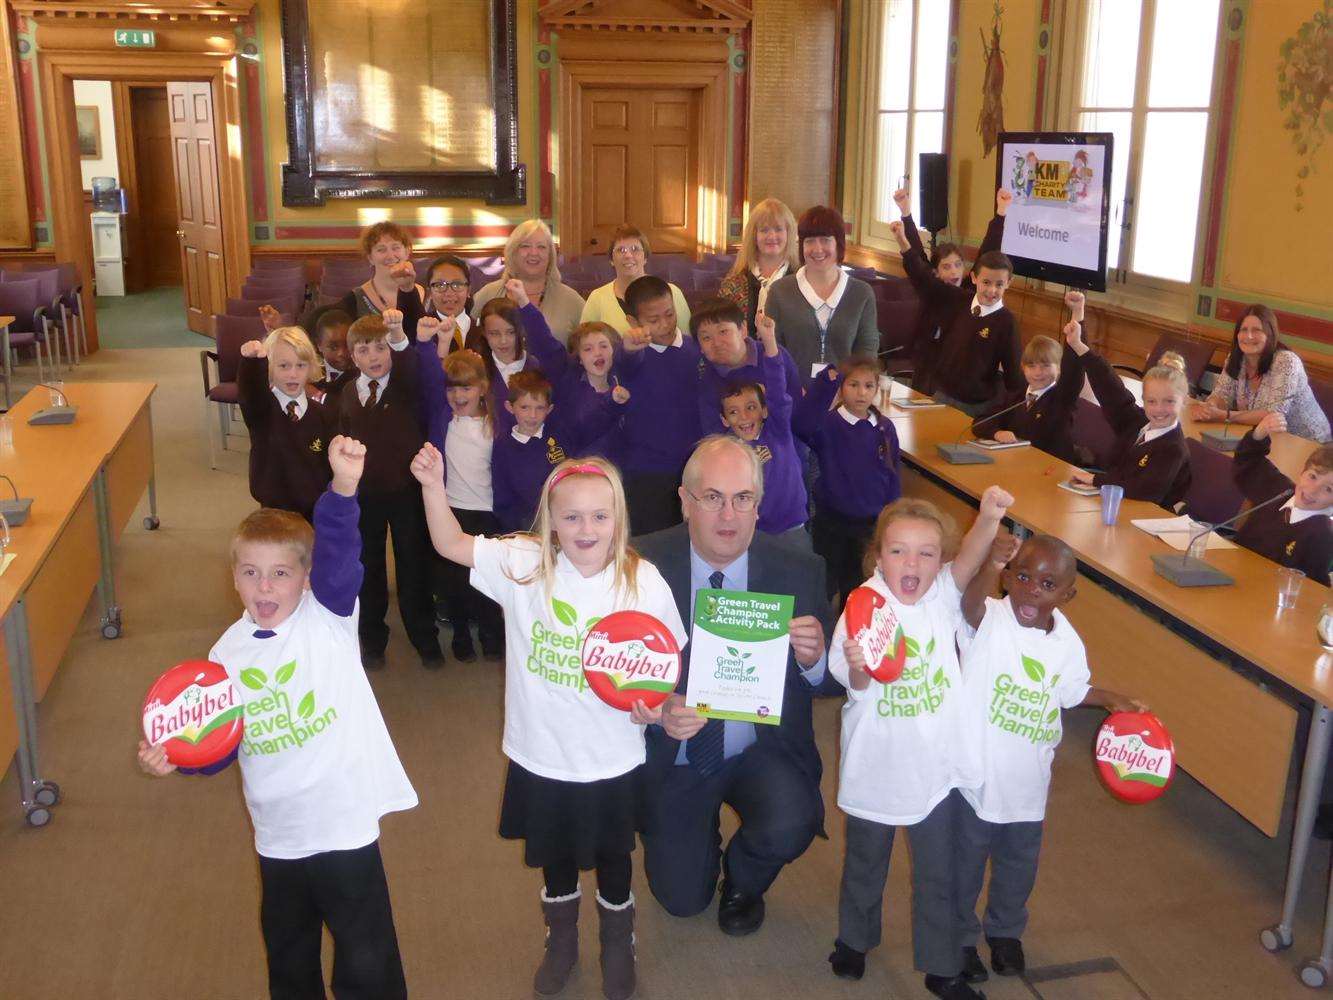 Maidstone Council Environmental Health Manager Steve Wilcock launches the Green Champion scheme supported by Archbishop Courtney pupils David Smith, seven, Jasmine Woodridge, eight, Mya Riddell, six, and Kenan Minta, four, cheered on by school delegates.